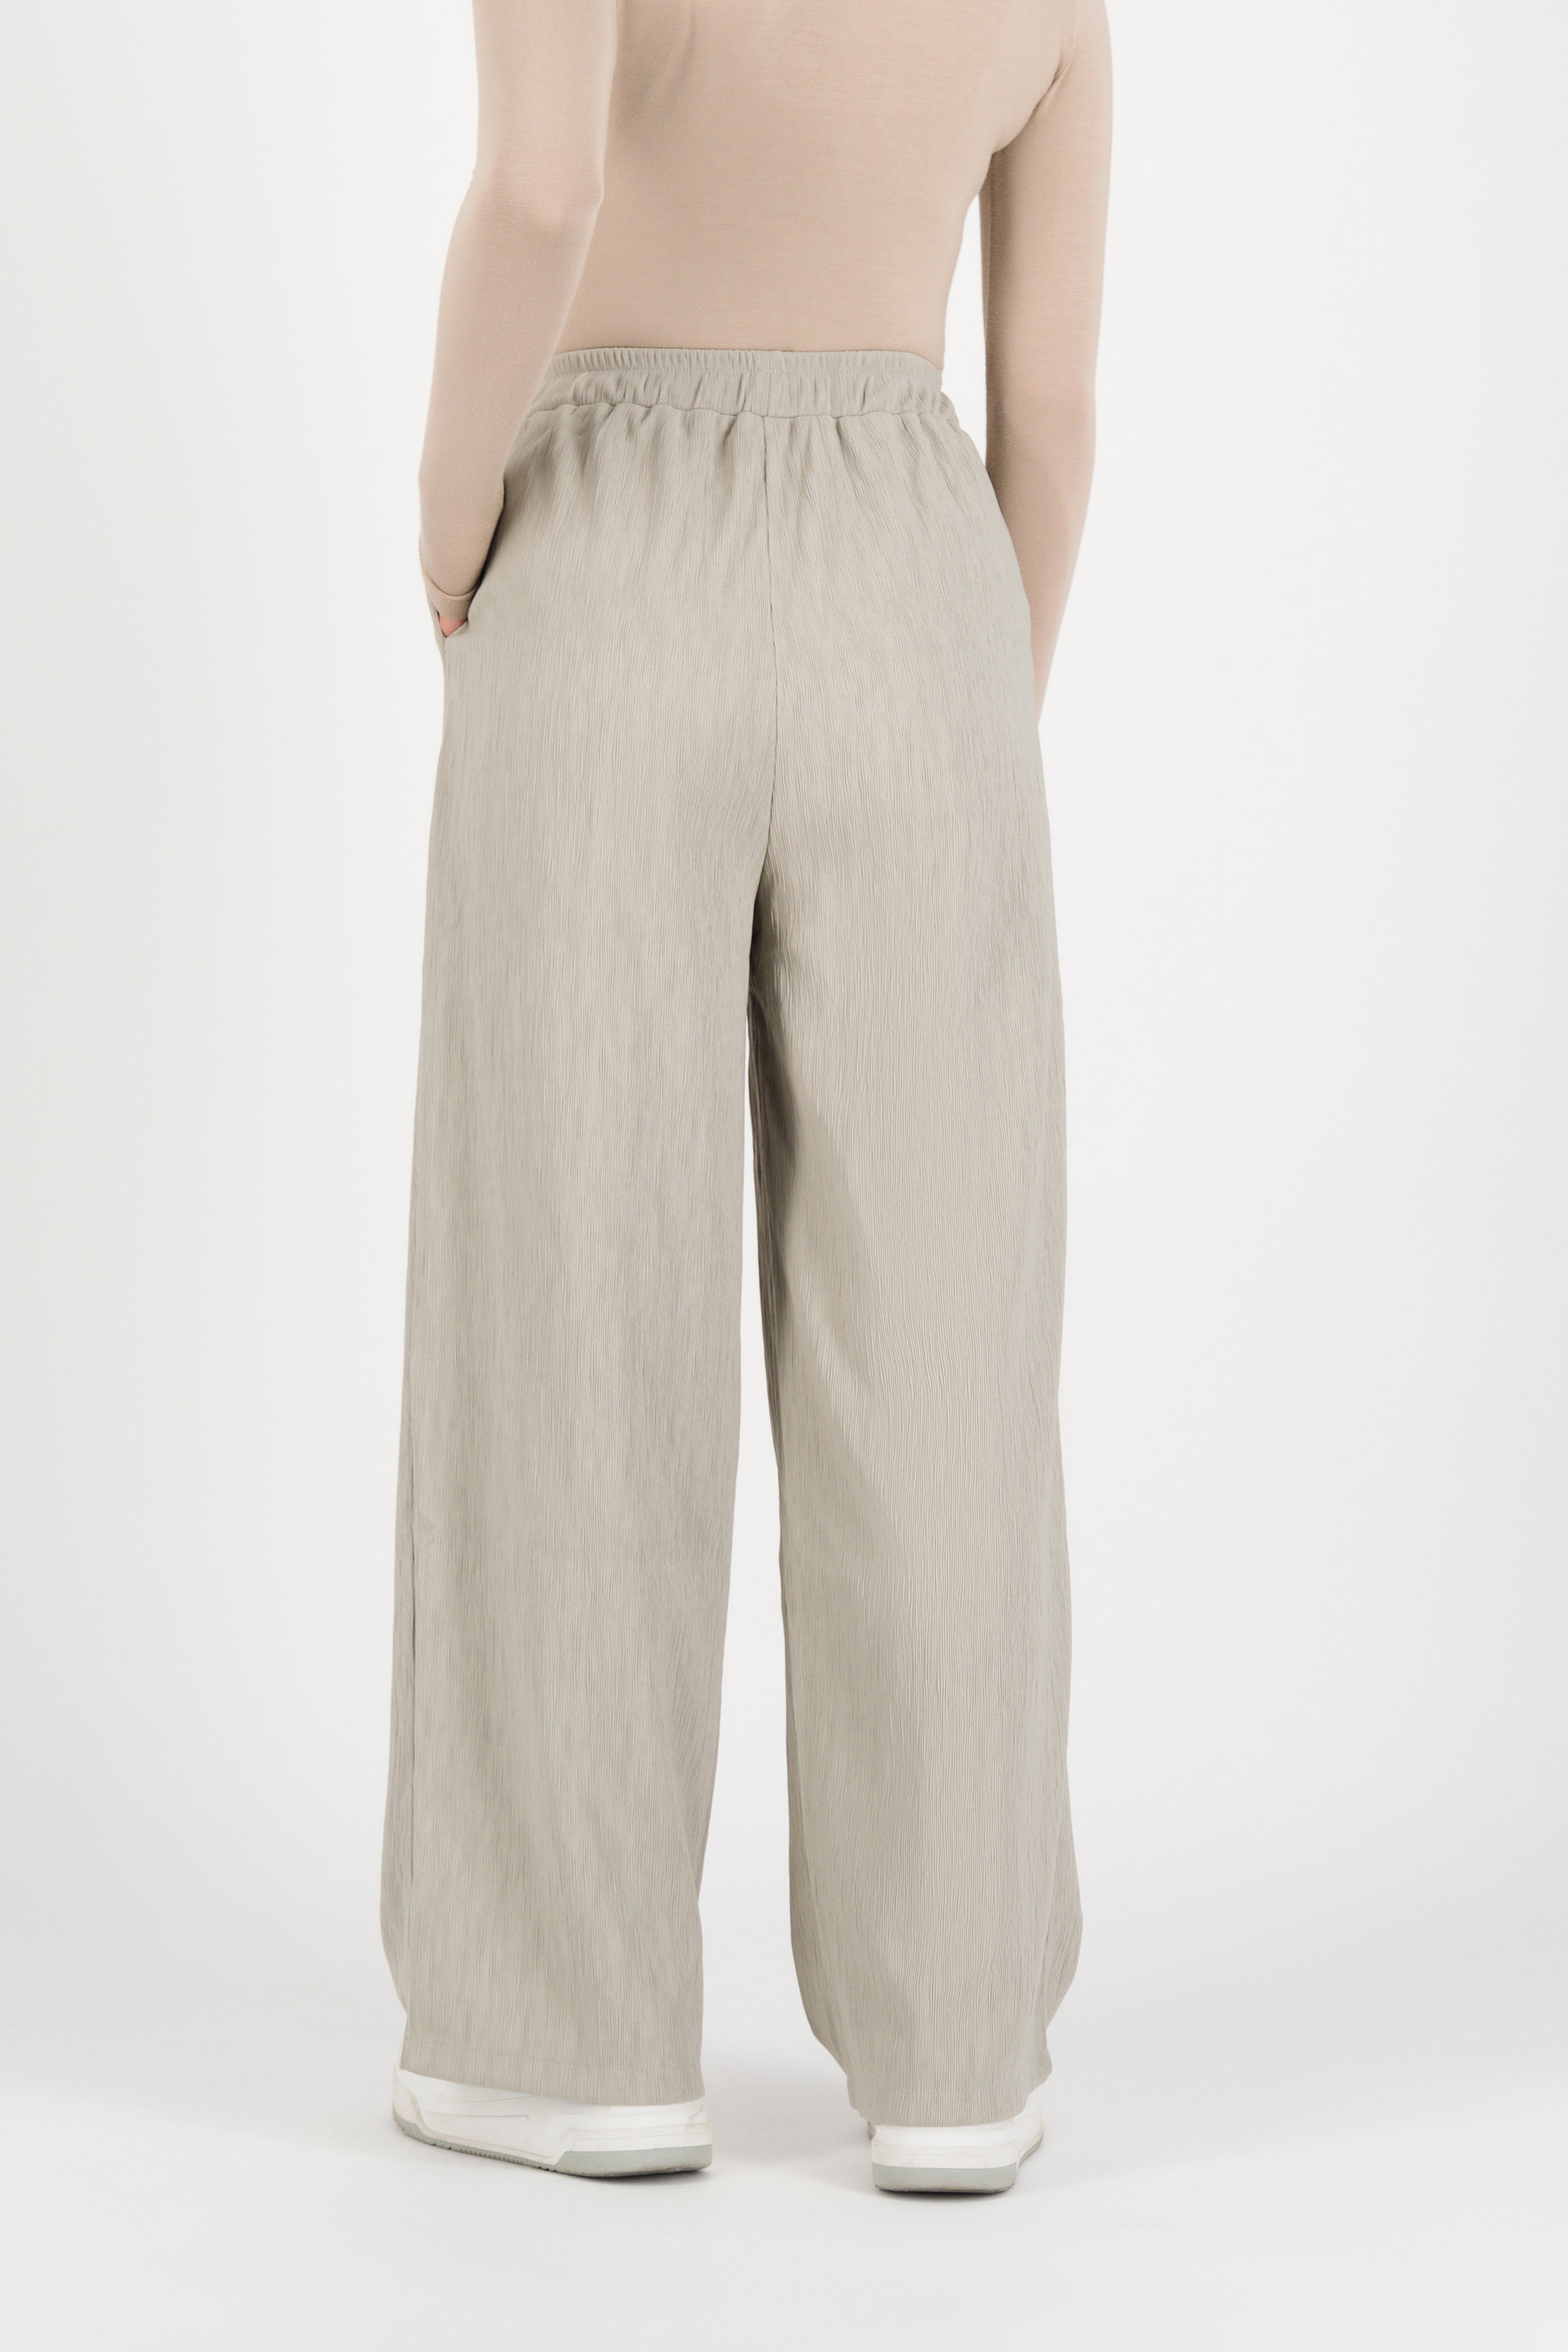 CA - Wavy Relaxed-Fit Pants - Mist